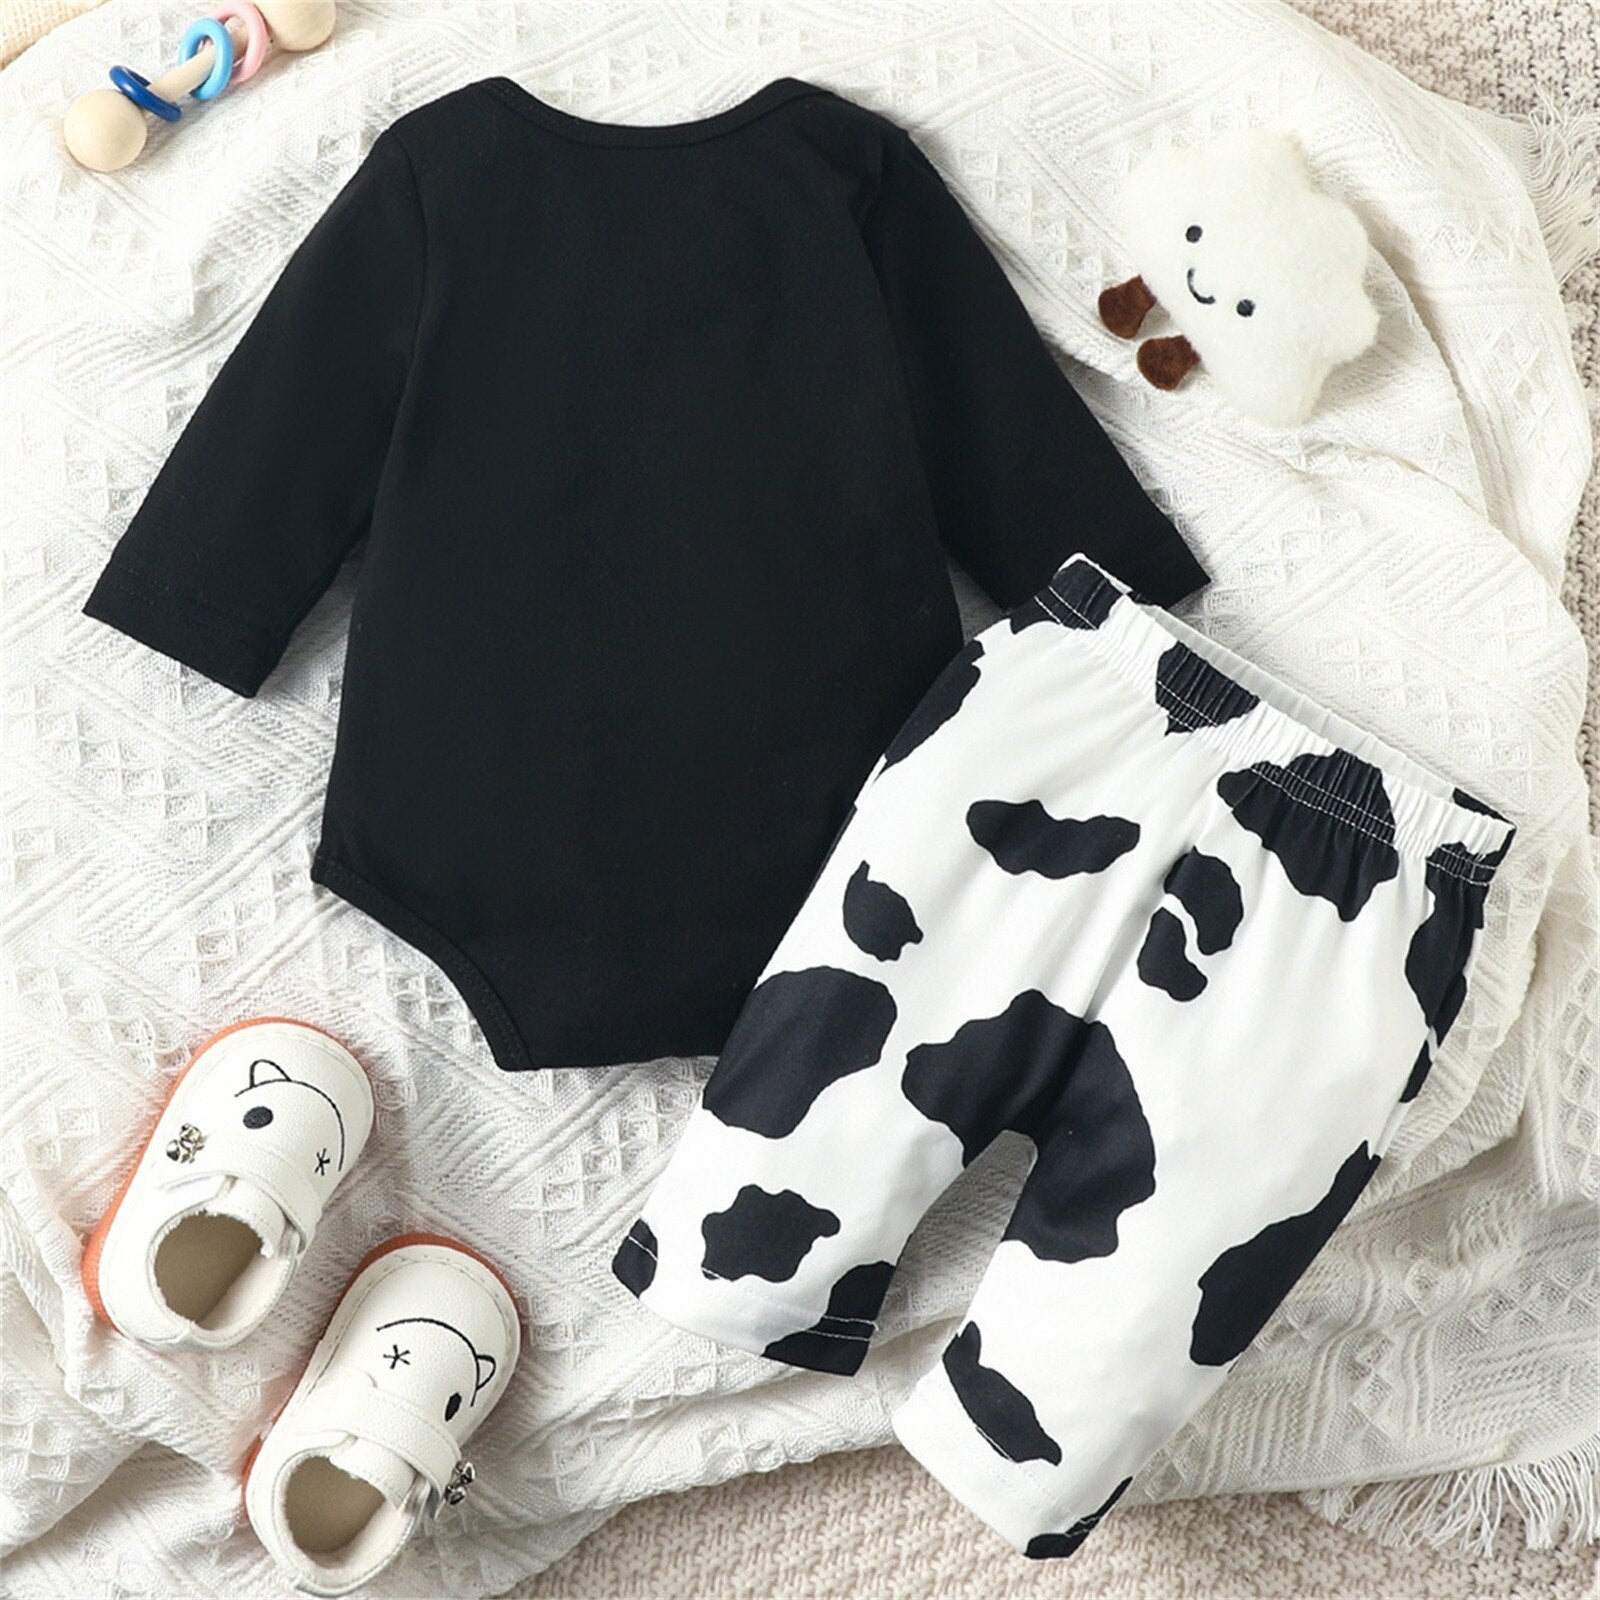 Cute Cow Print Newborn Baby Girl Clothes Set - Long Sleeve Tops and Pants Outfit